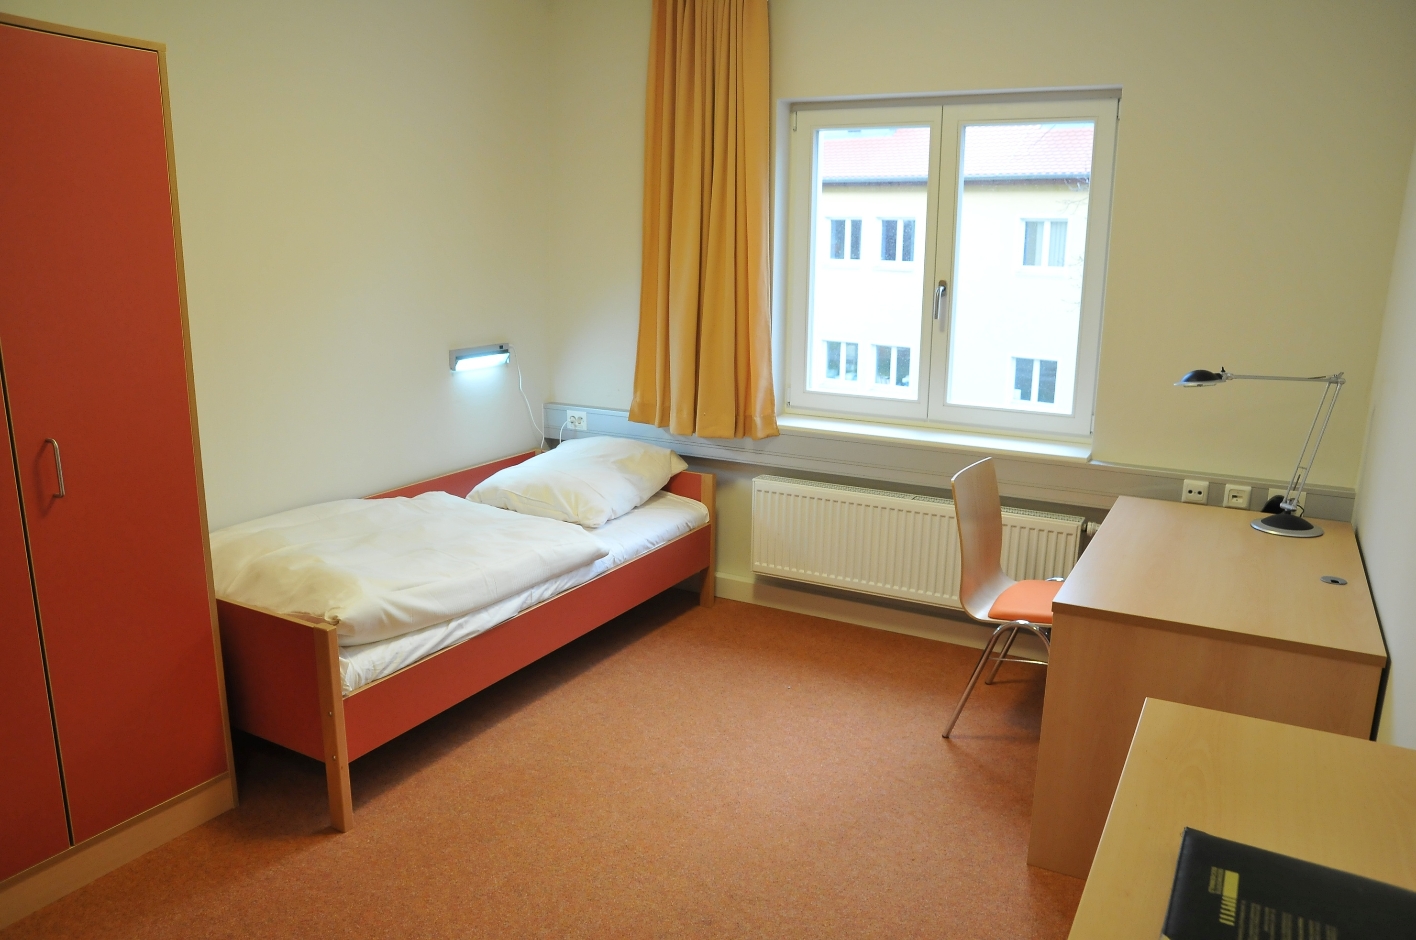 A guest room in the International Youth Meeting Center of the Buchenwald Memorial. On the left is a closet, next to it a single bed, then comes a window. On the opposite wall is a desk with a chair and a smaller cabinet.